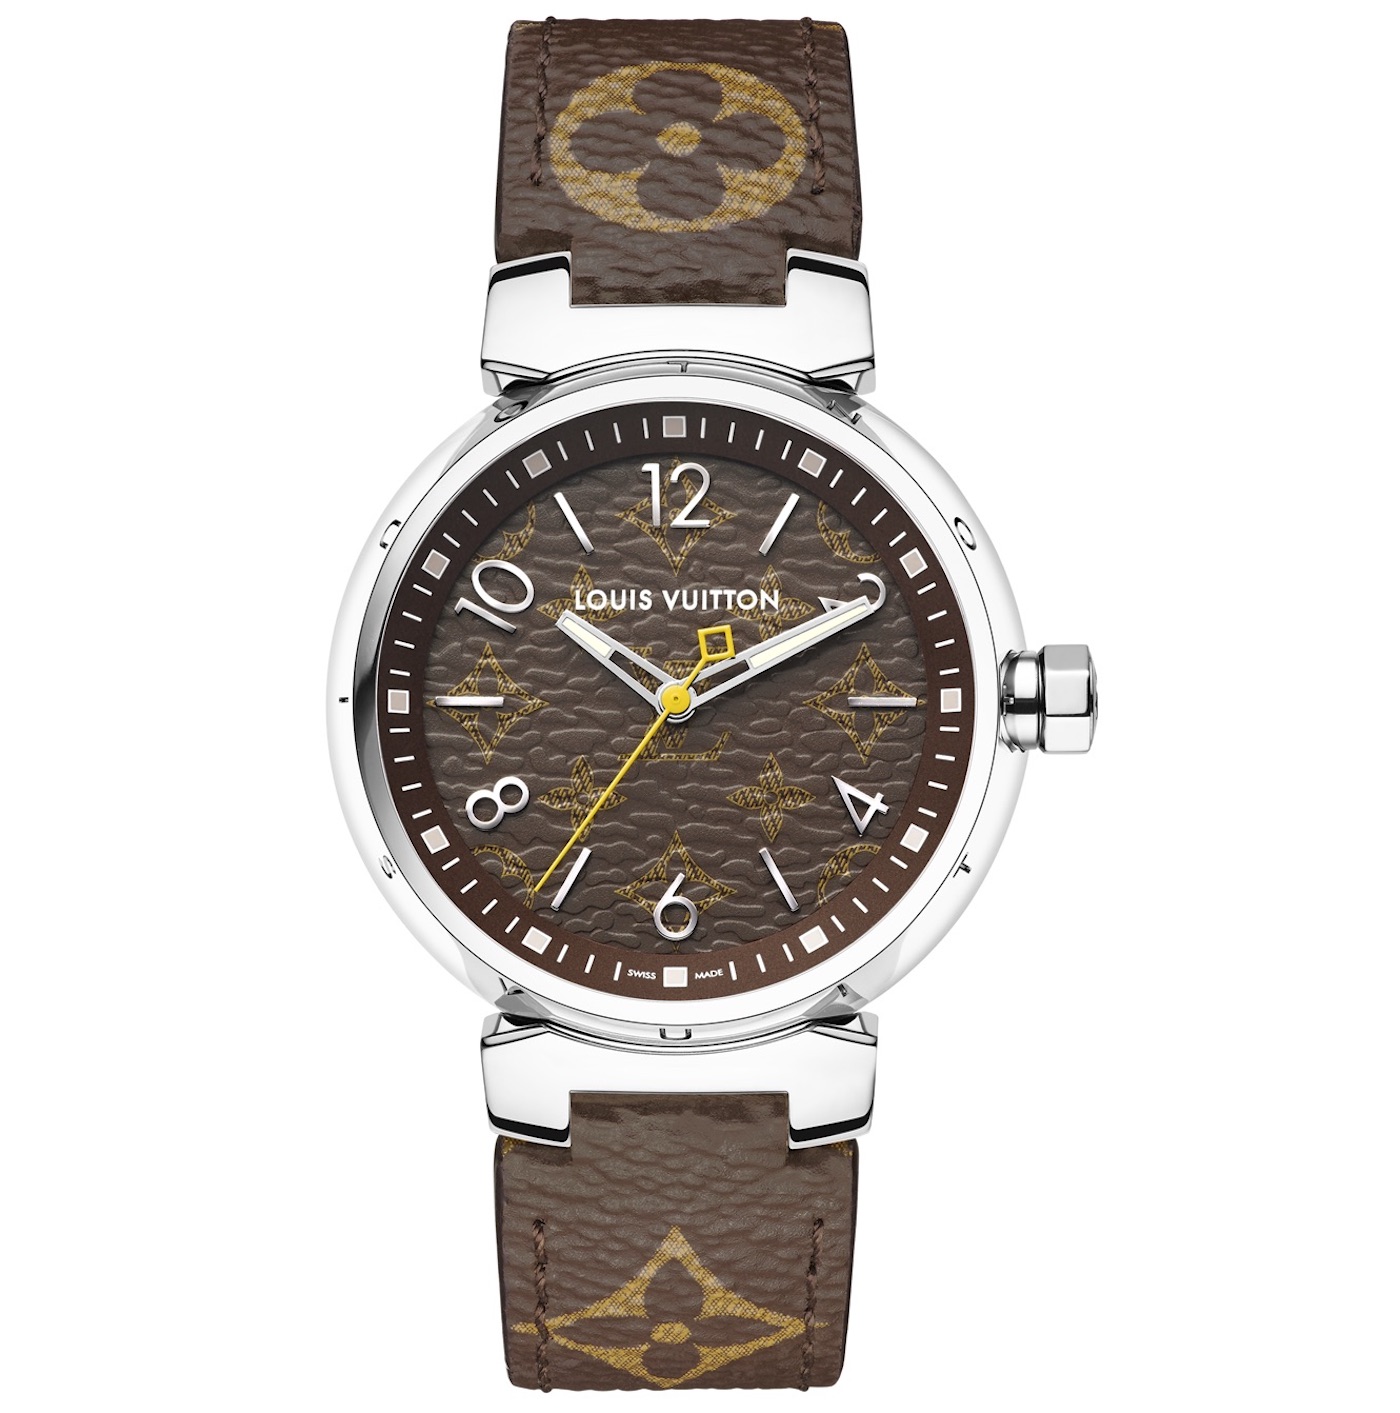 Louis Vuitton Tambour Icons Watch Collection | aBlogtoWatch